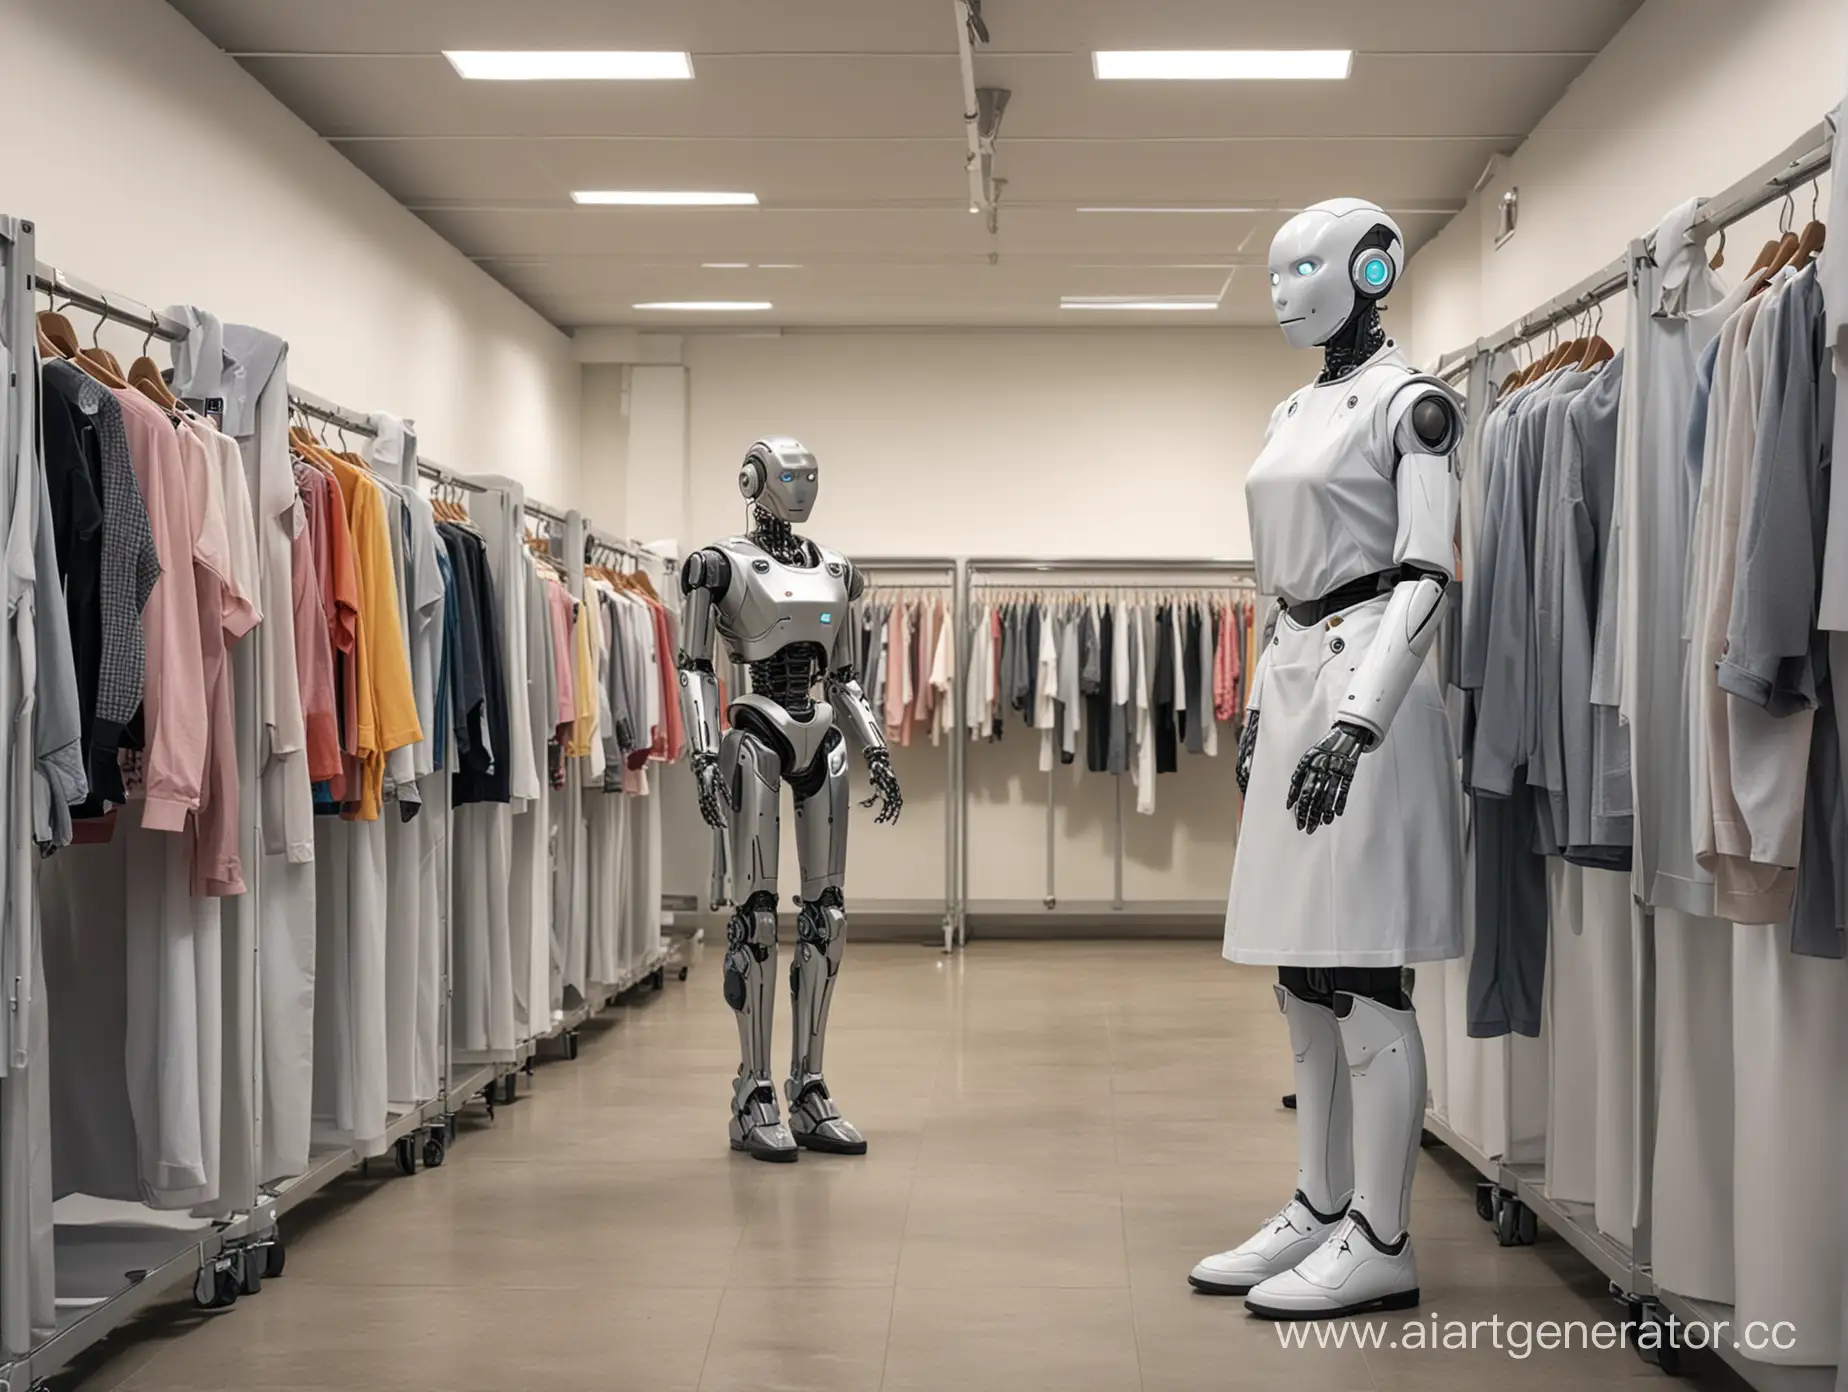 Robot-Cloakroom-Attendant-Hanging-Up-Student-Clothing